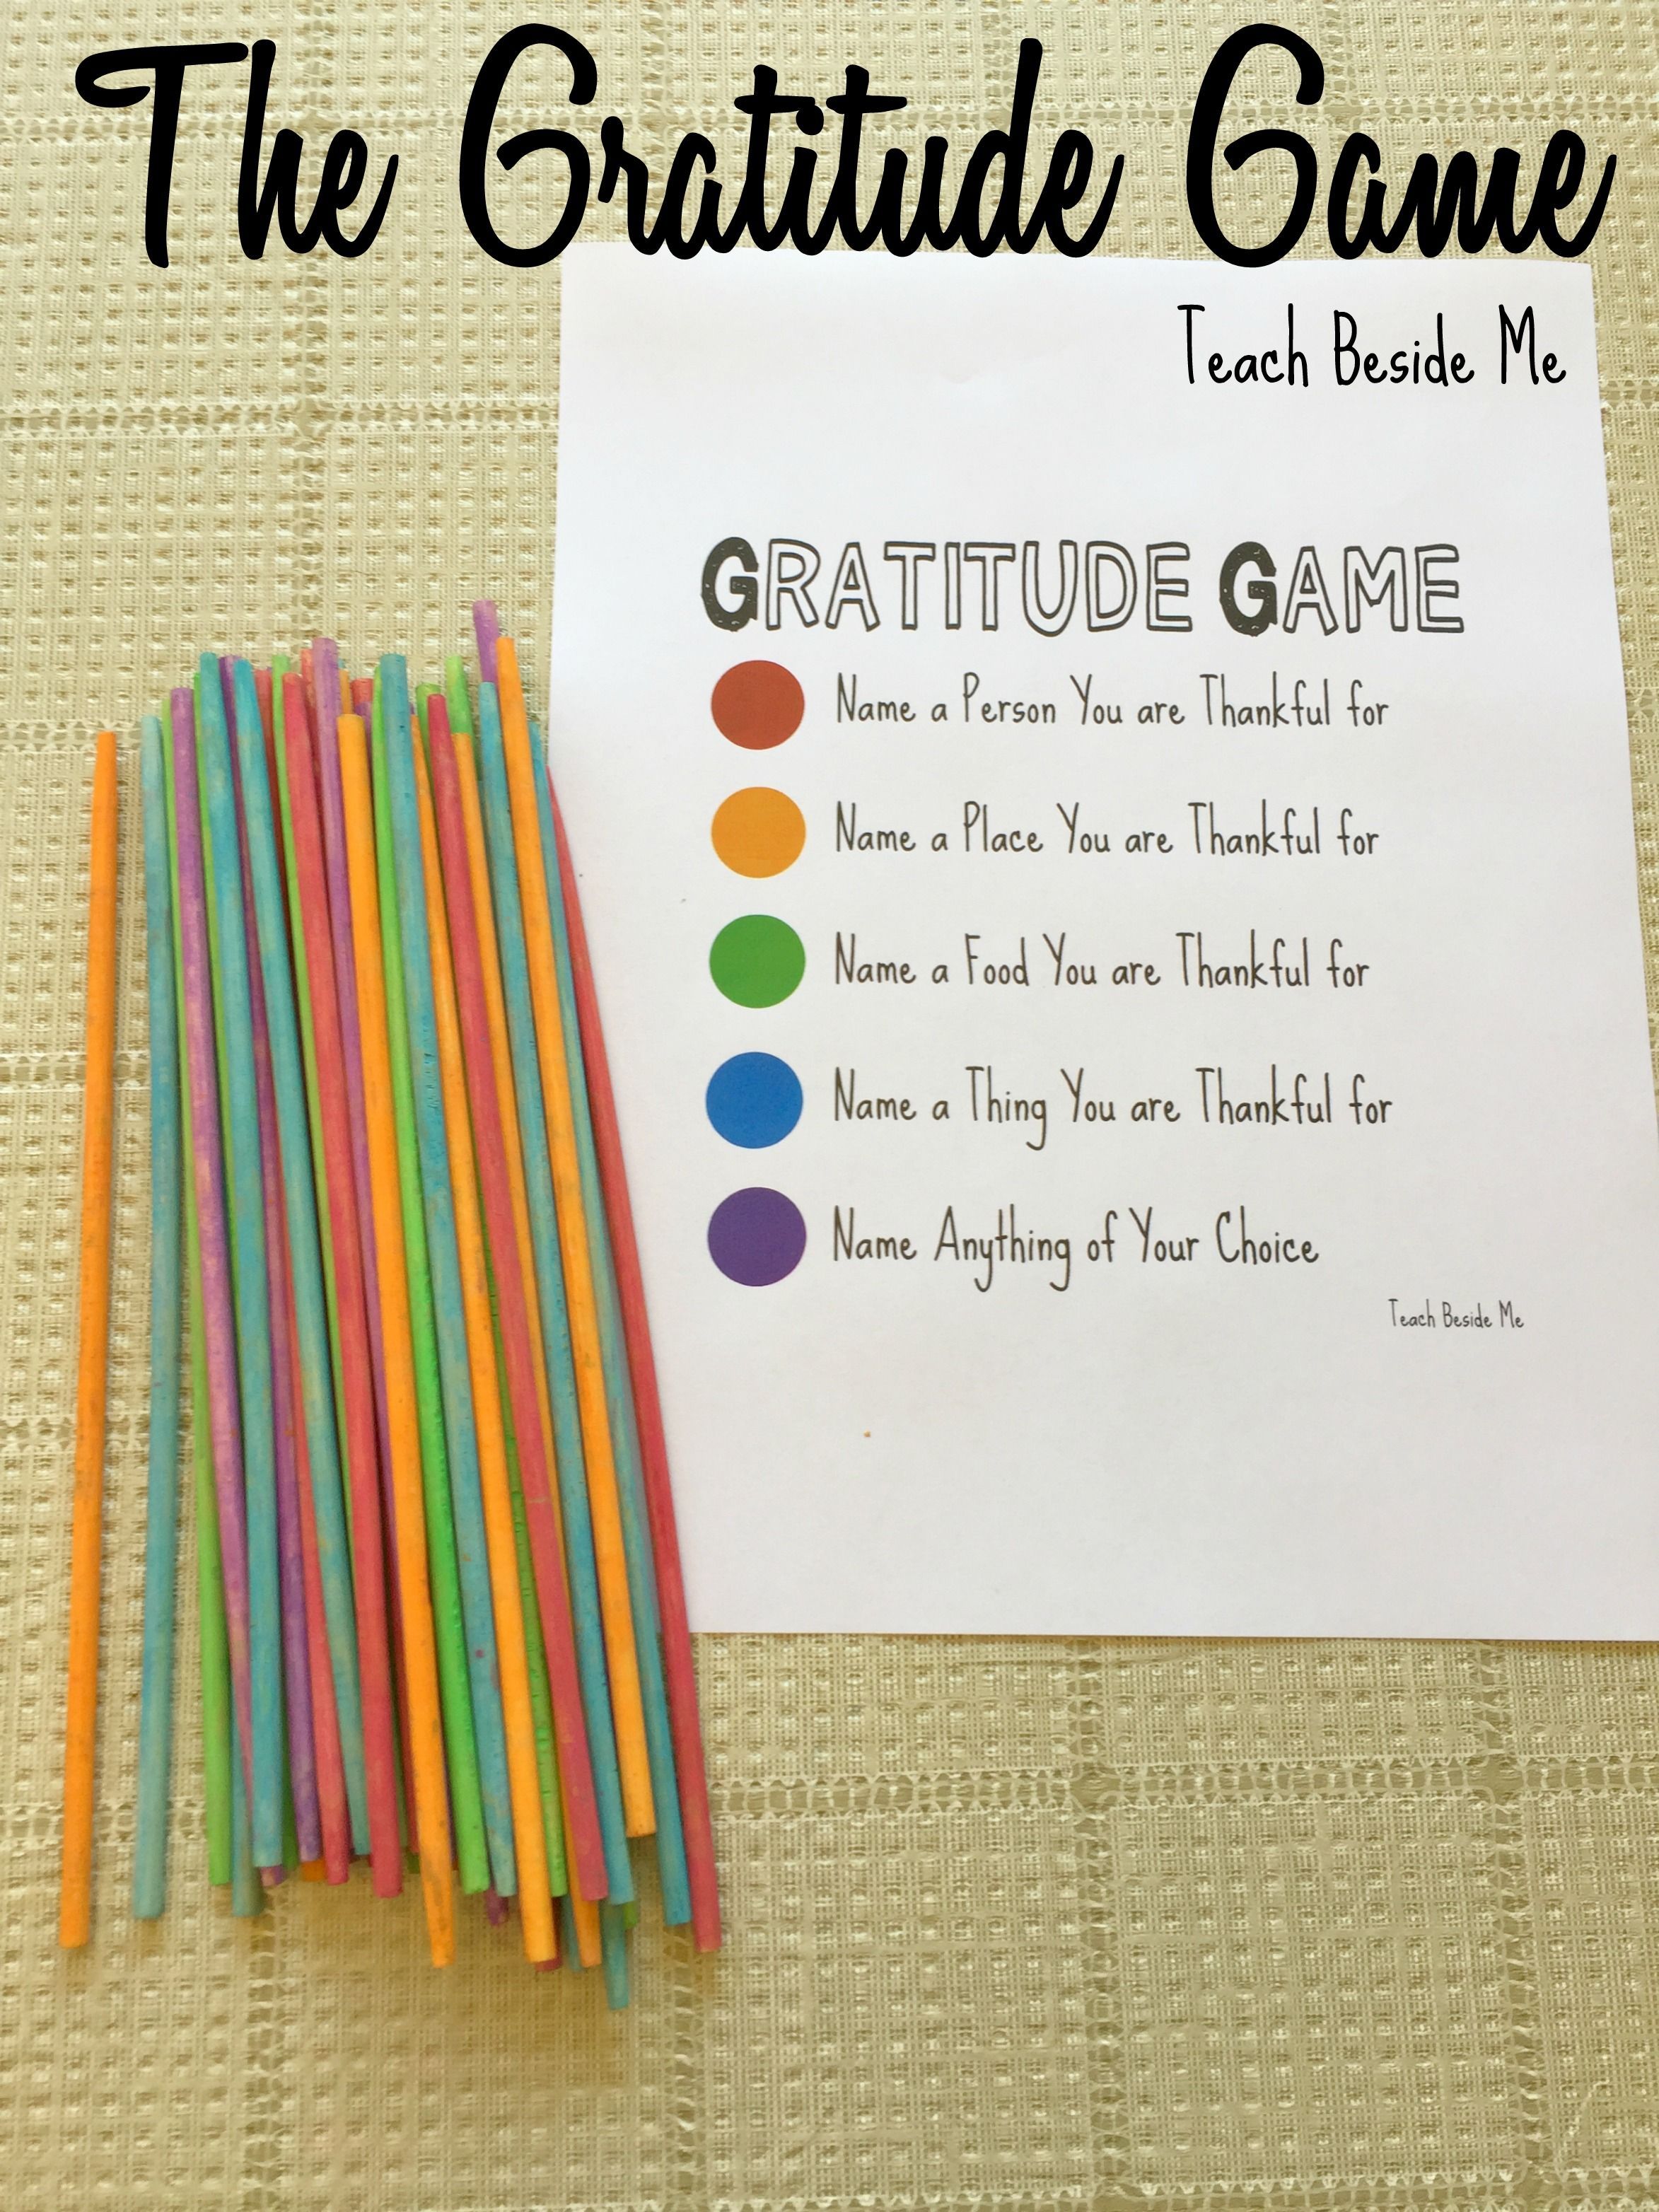 Play The Gratitude Game this Thanksgiving! -   24 thanksgiving crafts for school
 ideas